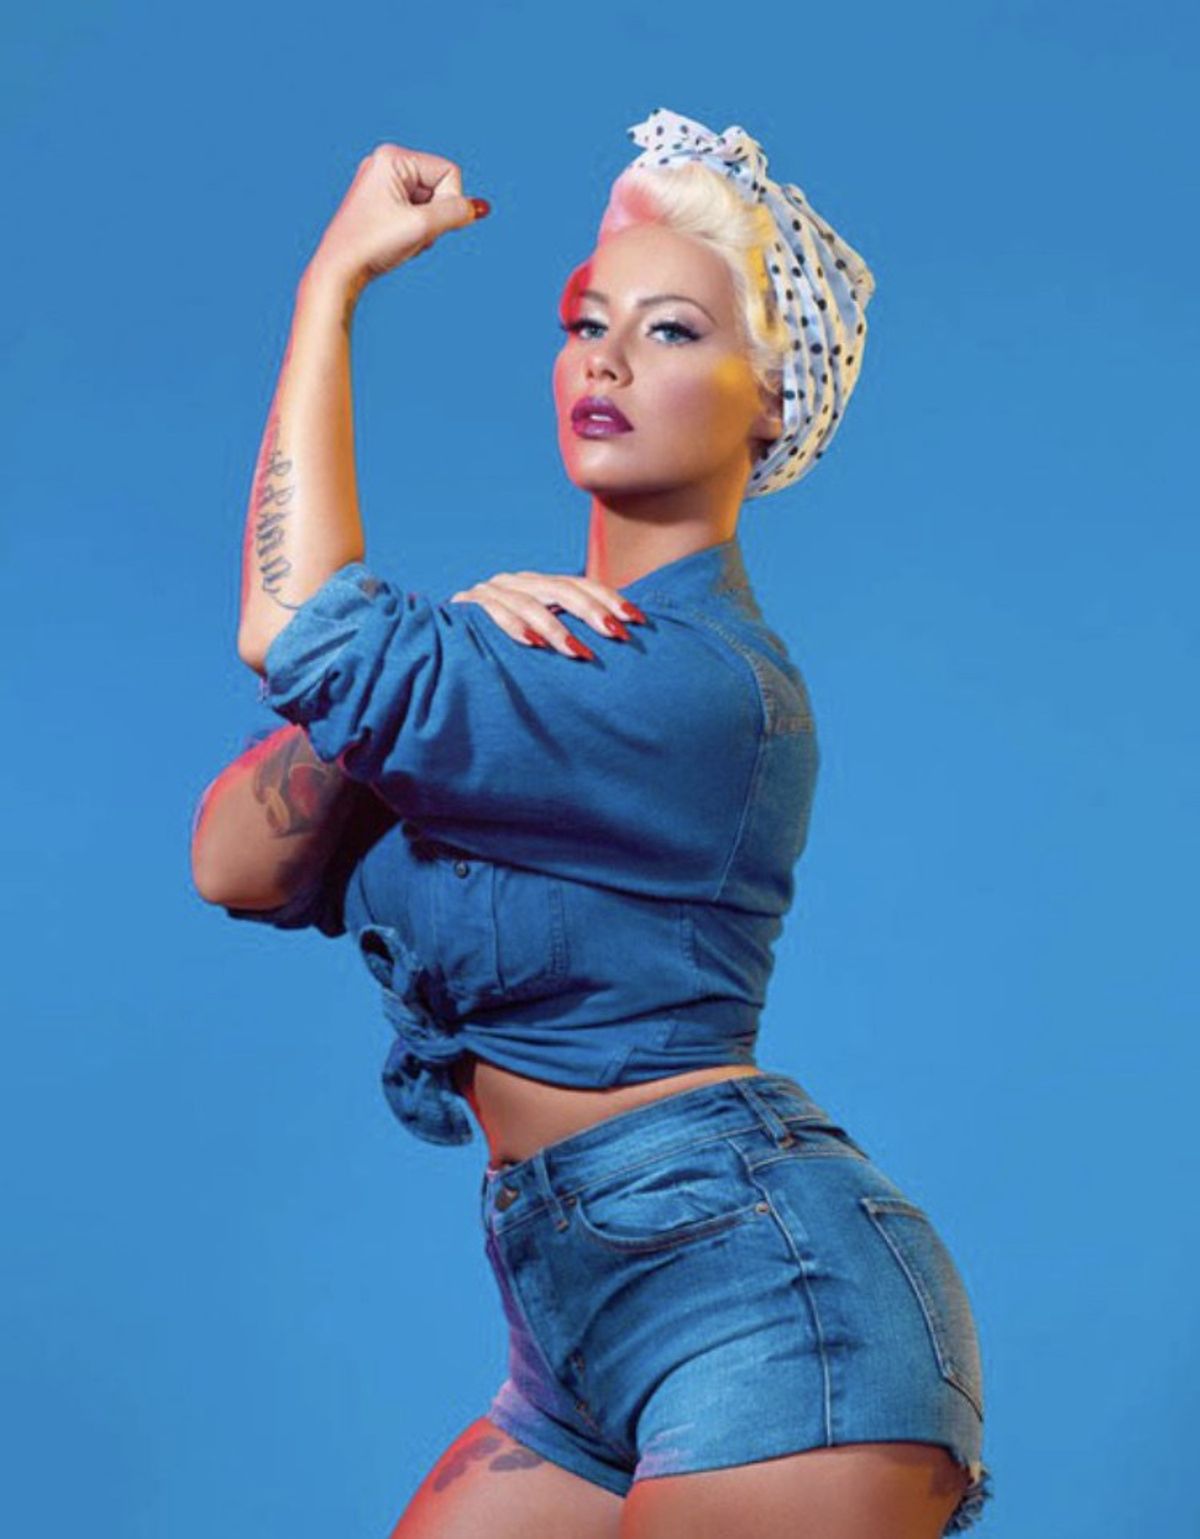 A Few Reasons Why Amber Rose is Not a Feminist